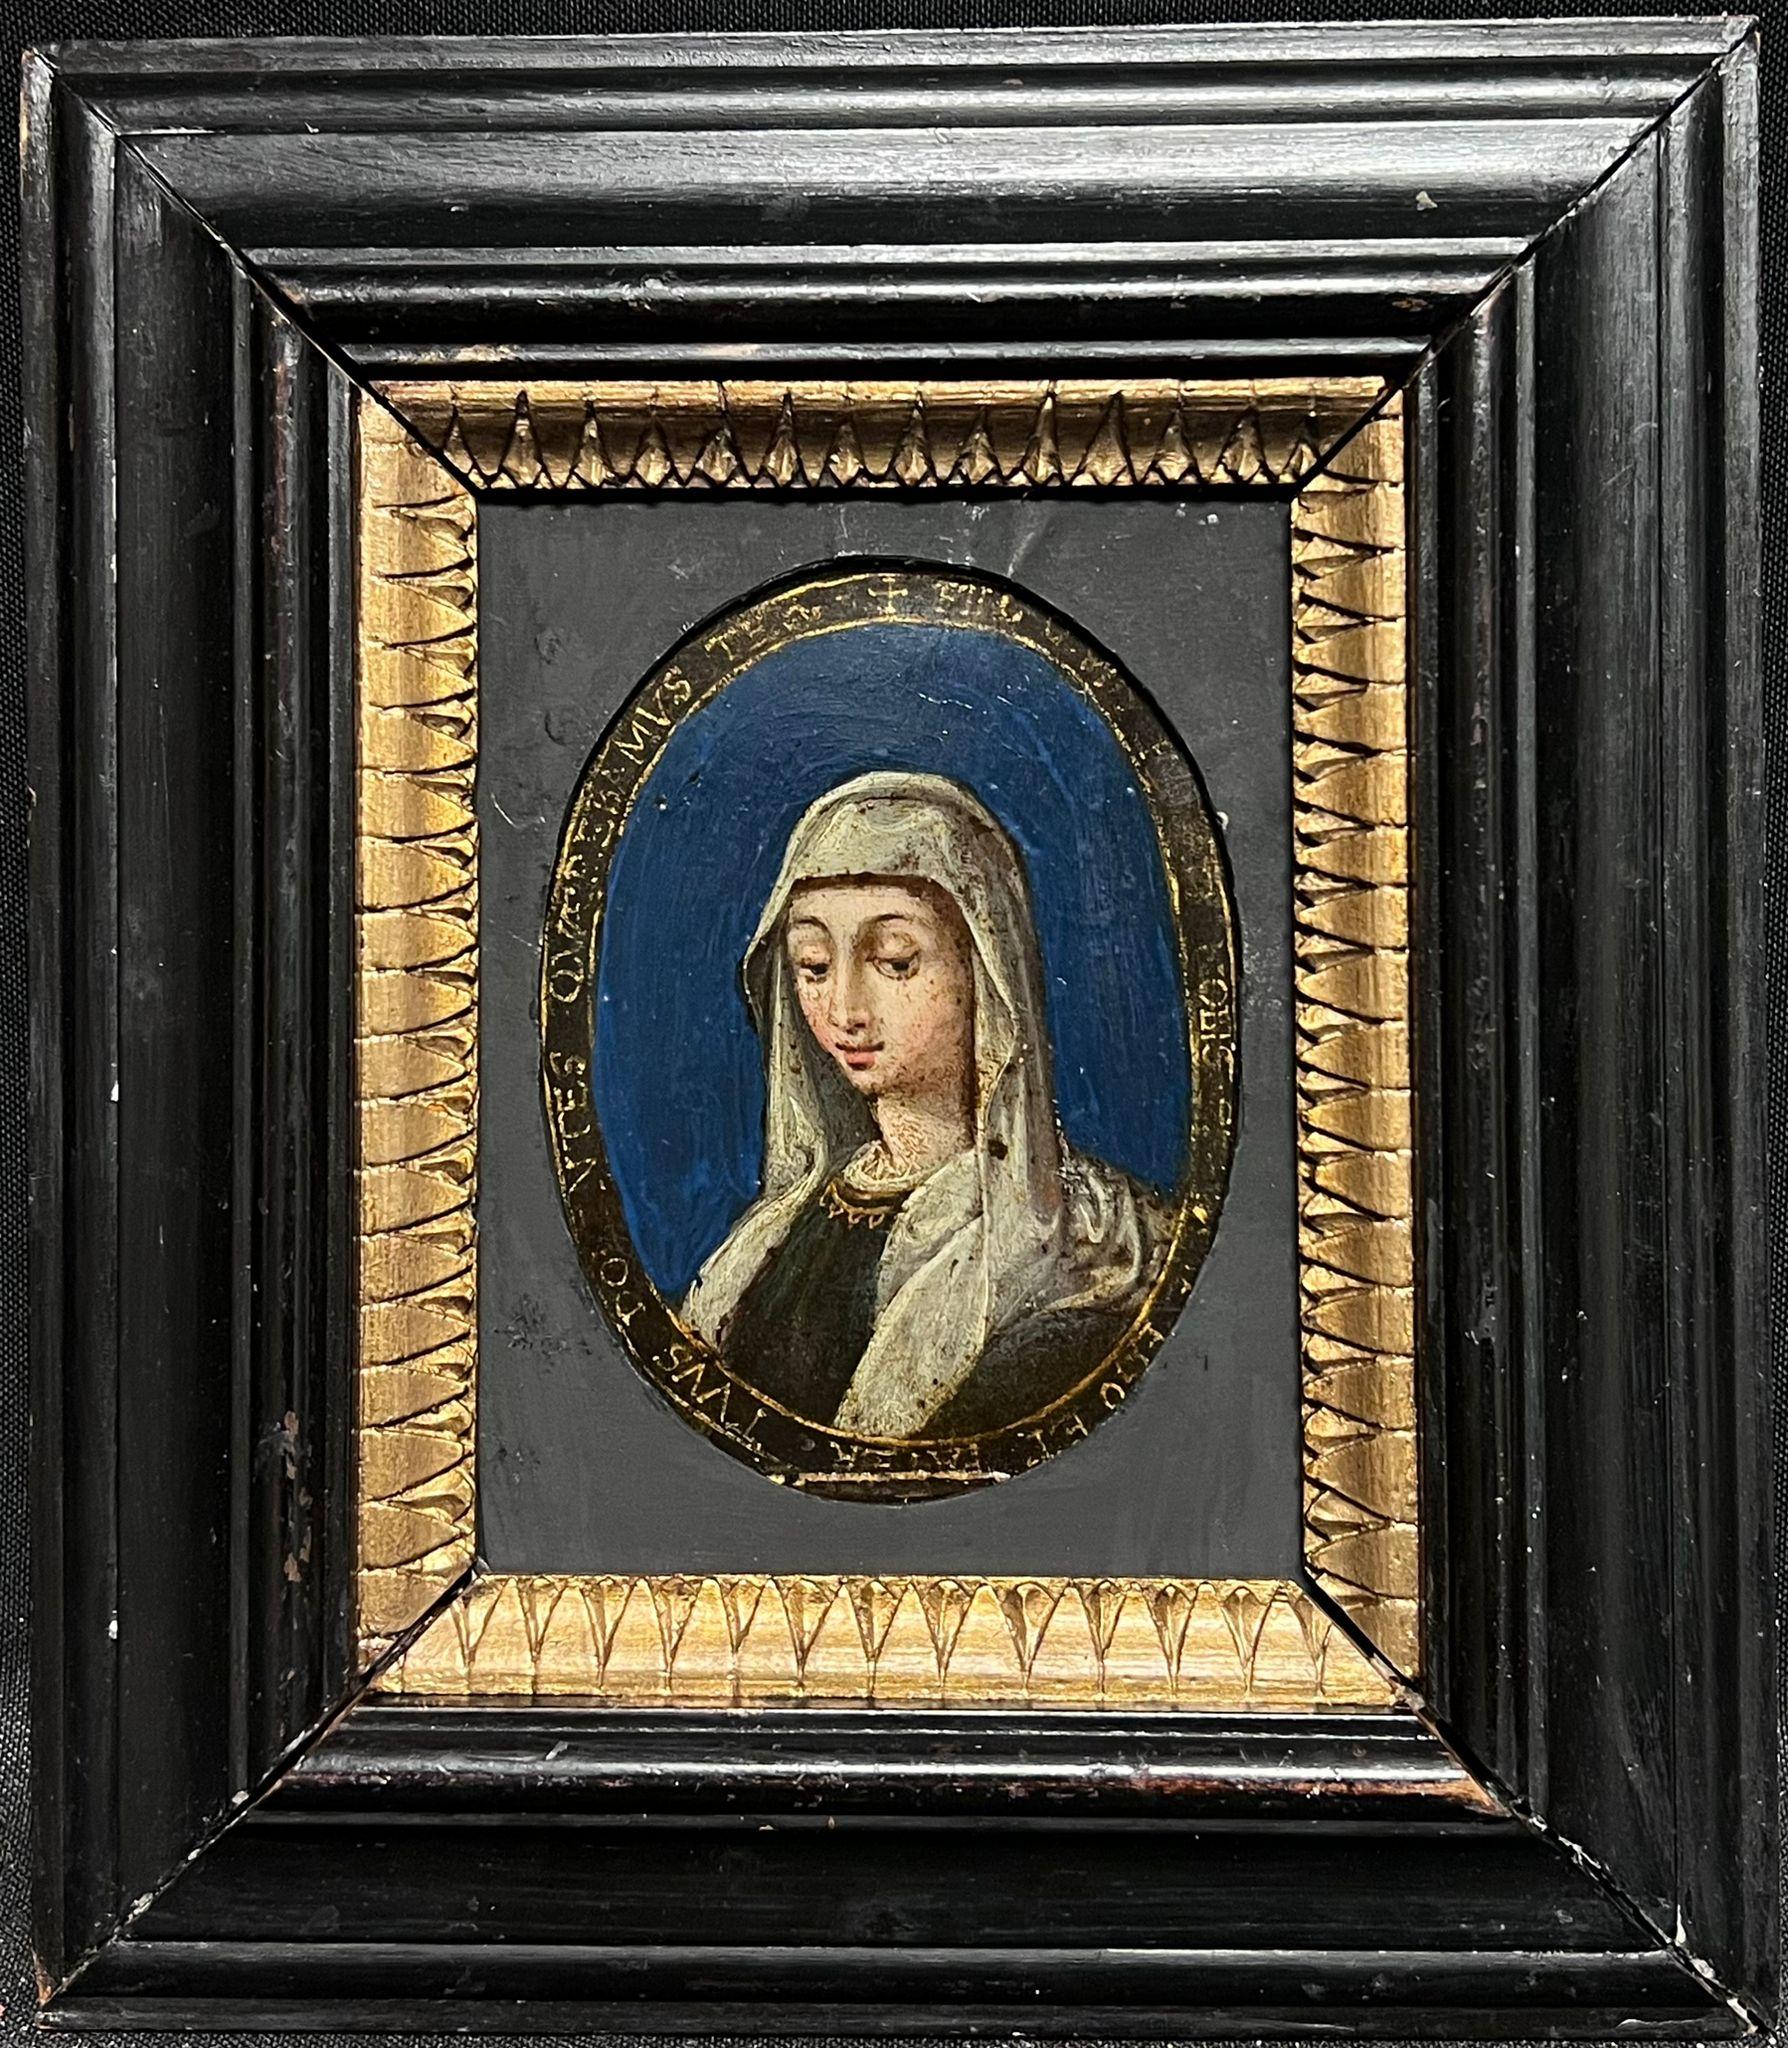 Portrait of a Lady (female saint?)
Italian School, 17th century
oil on copper, framed
frame: 9 x 8 inches
board: 5 x 4 inches
provenance: private collection
condition: very good and sound condition 